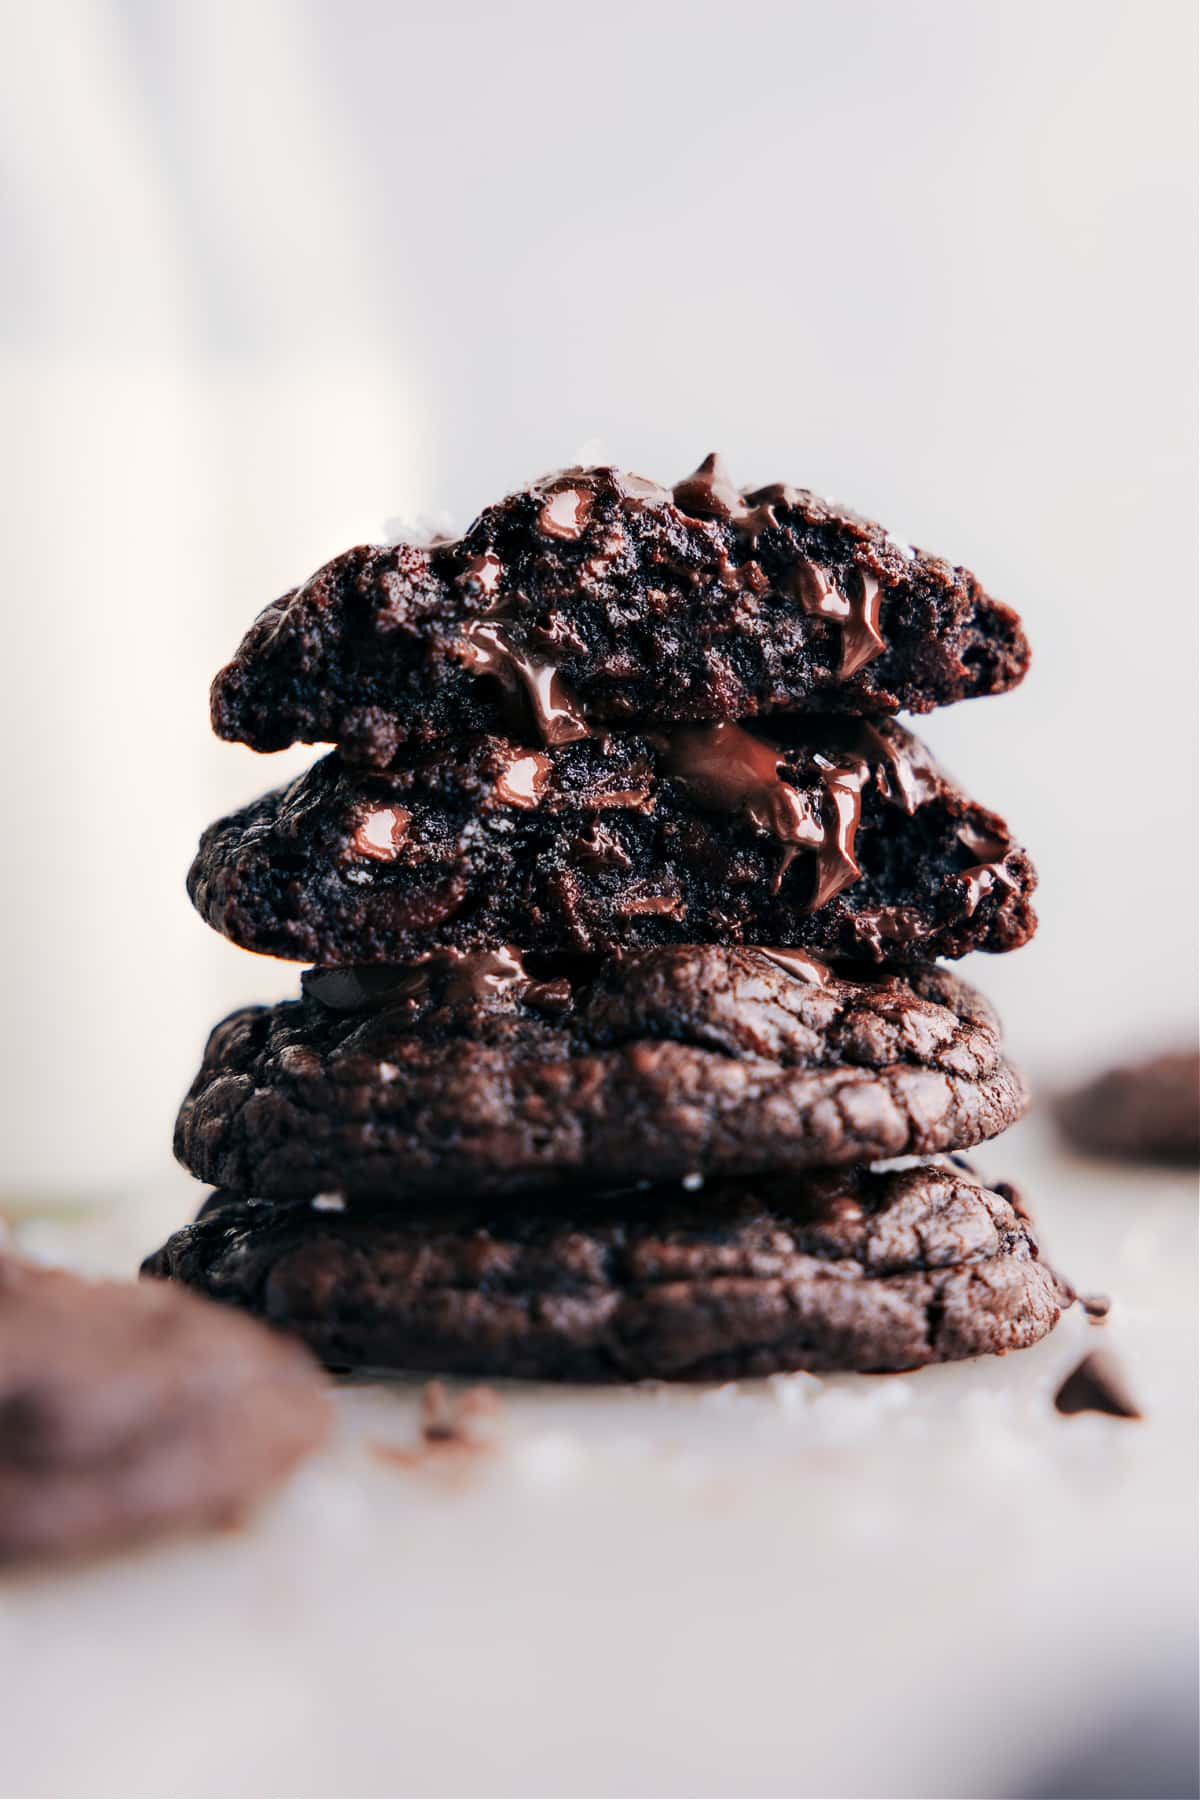 Stack of chocolate cookies ready to be enjoyed.